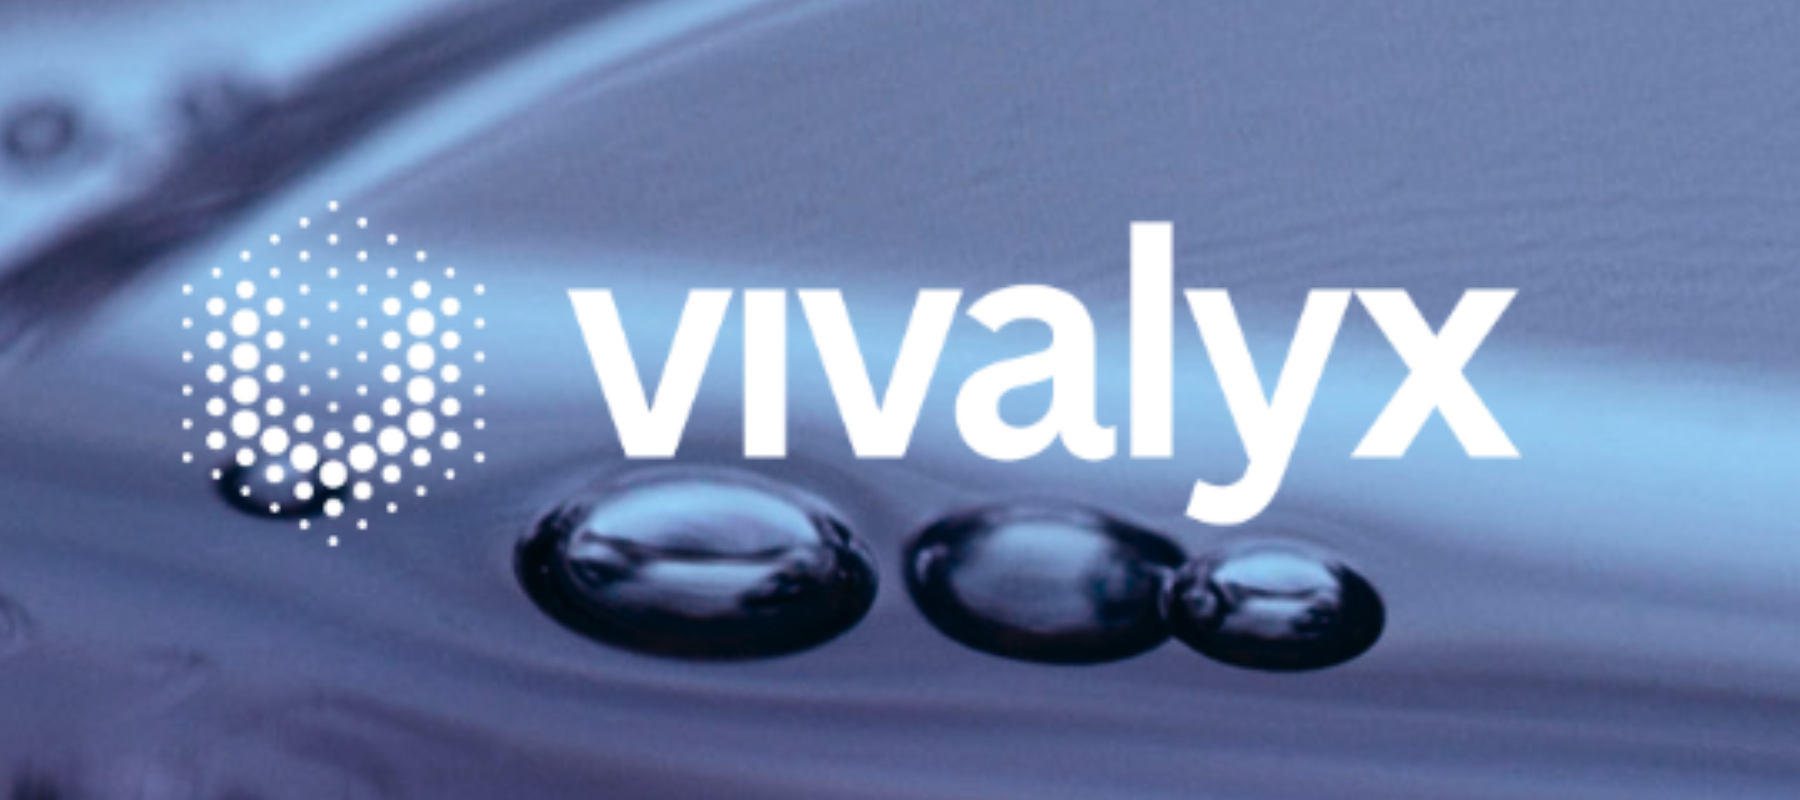 Aachen-based startup Vivalyx secures €5.4m seed financing to improve donor organ quality